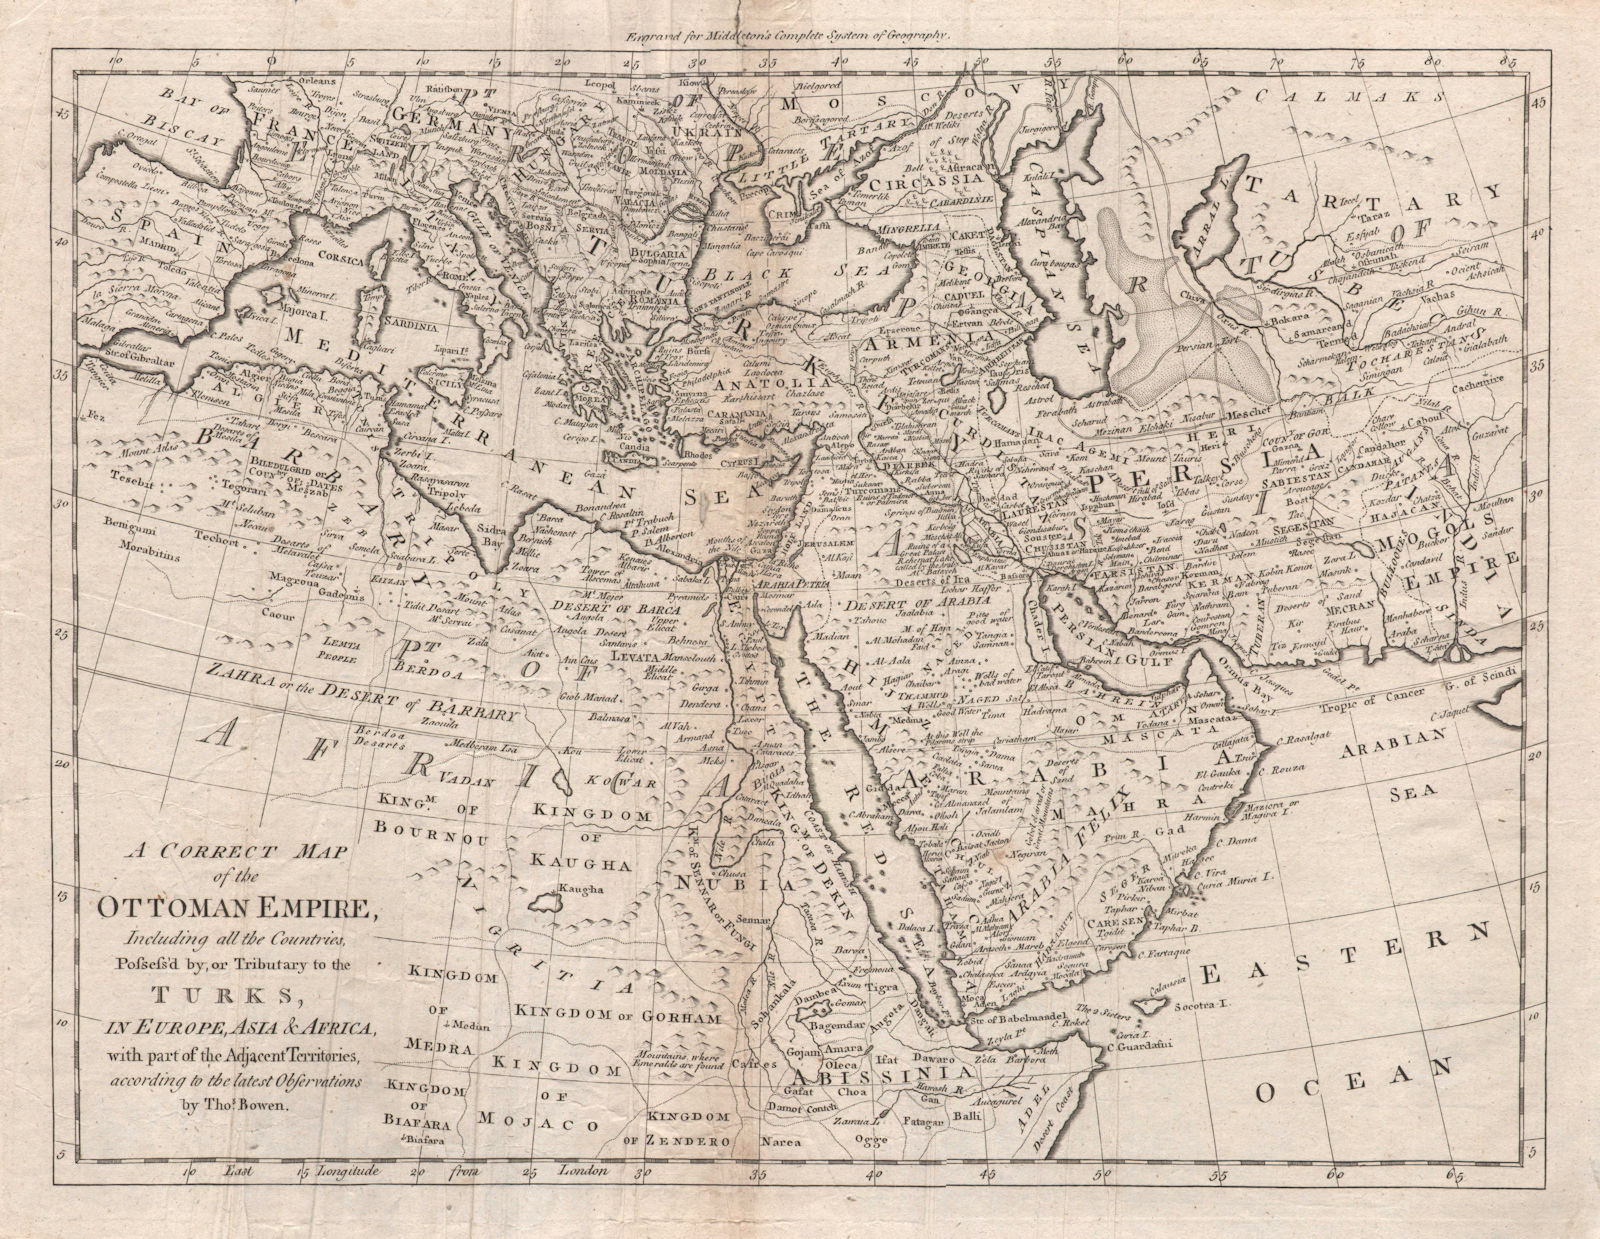 "A correct map of the Ottoman empire…" by Thomas Bowen. Middle East Arabia 1779